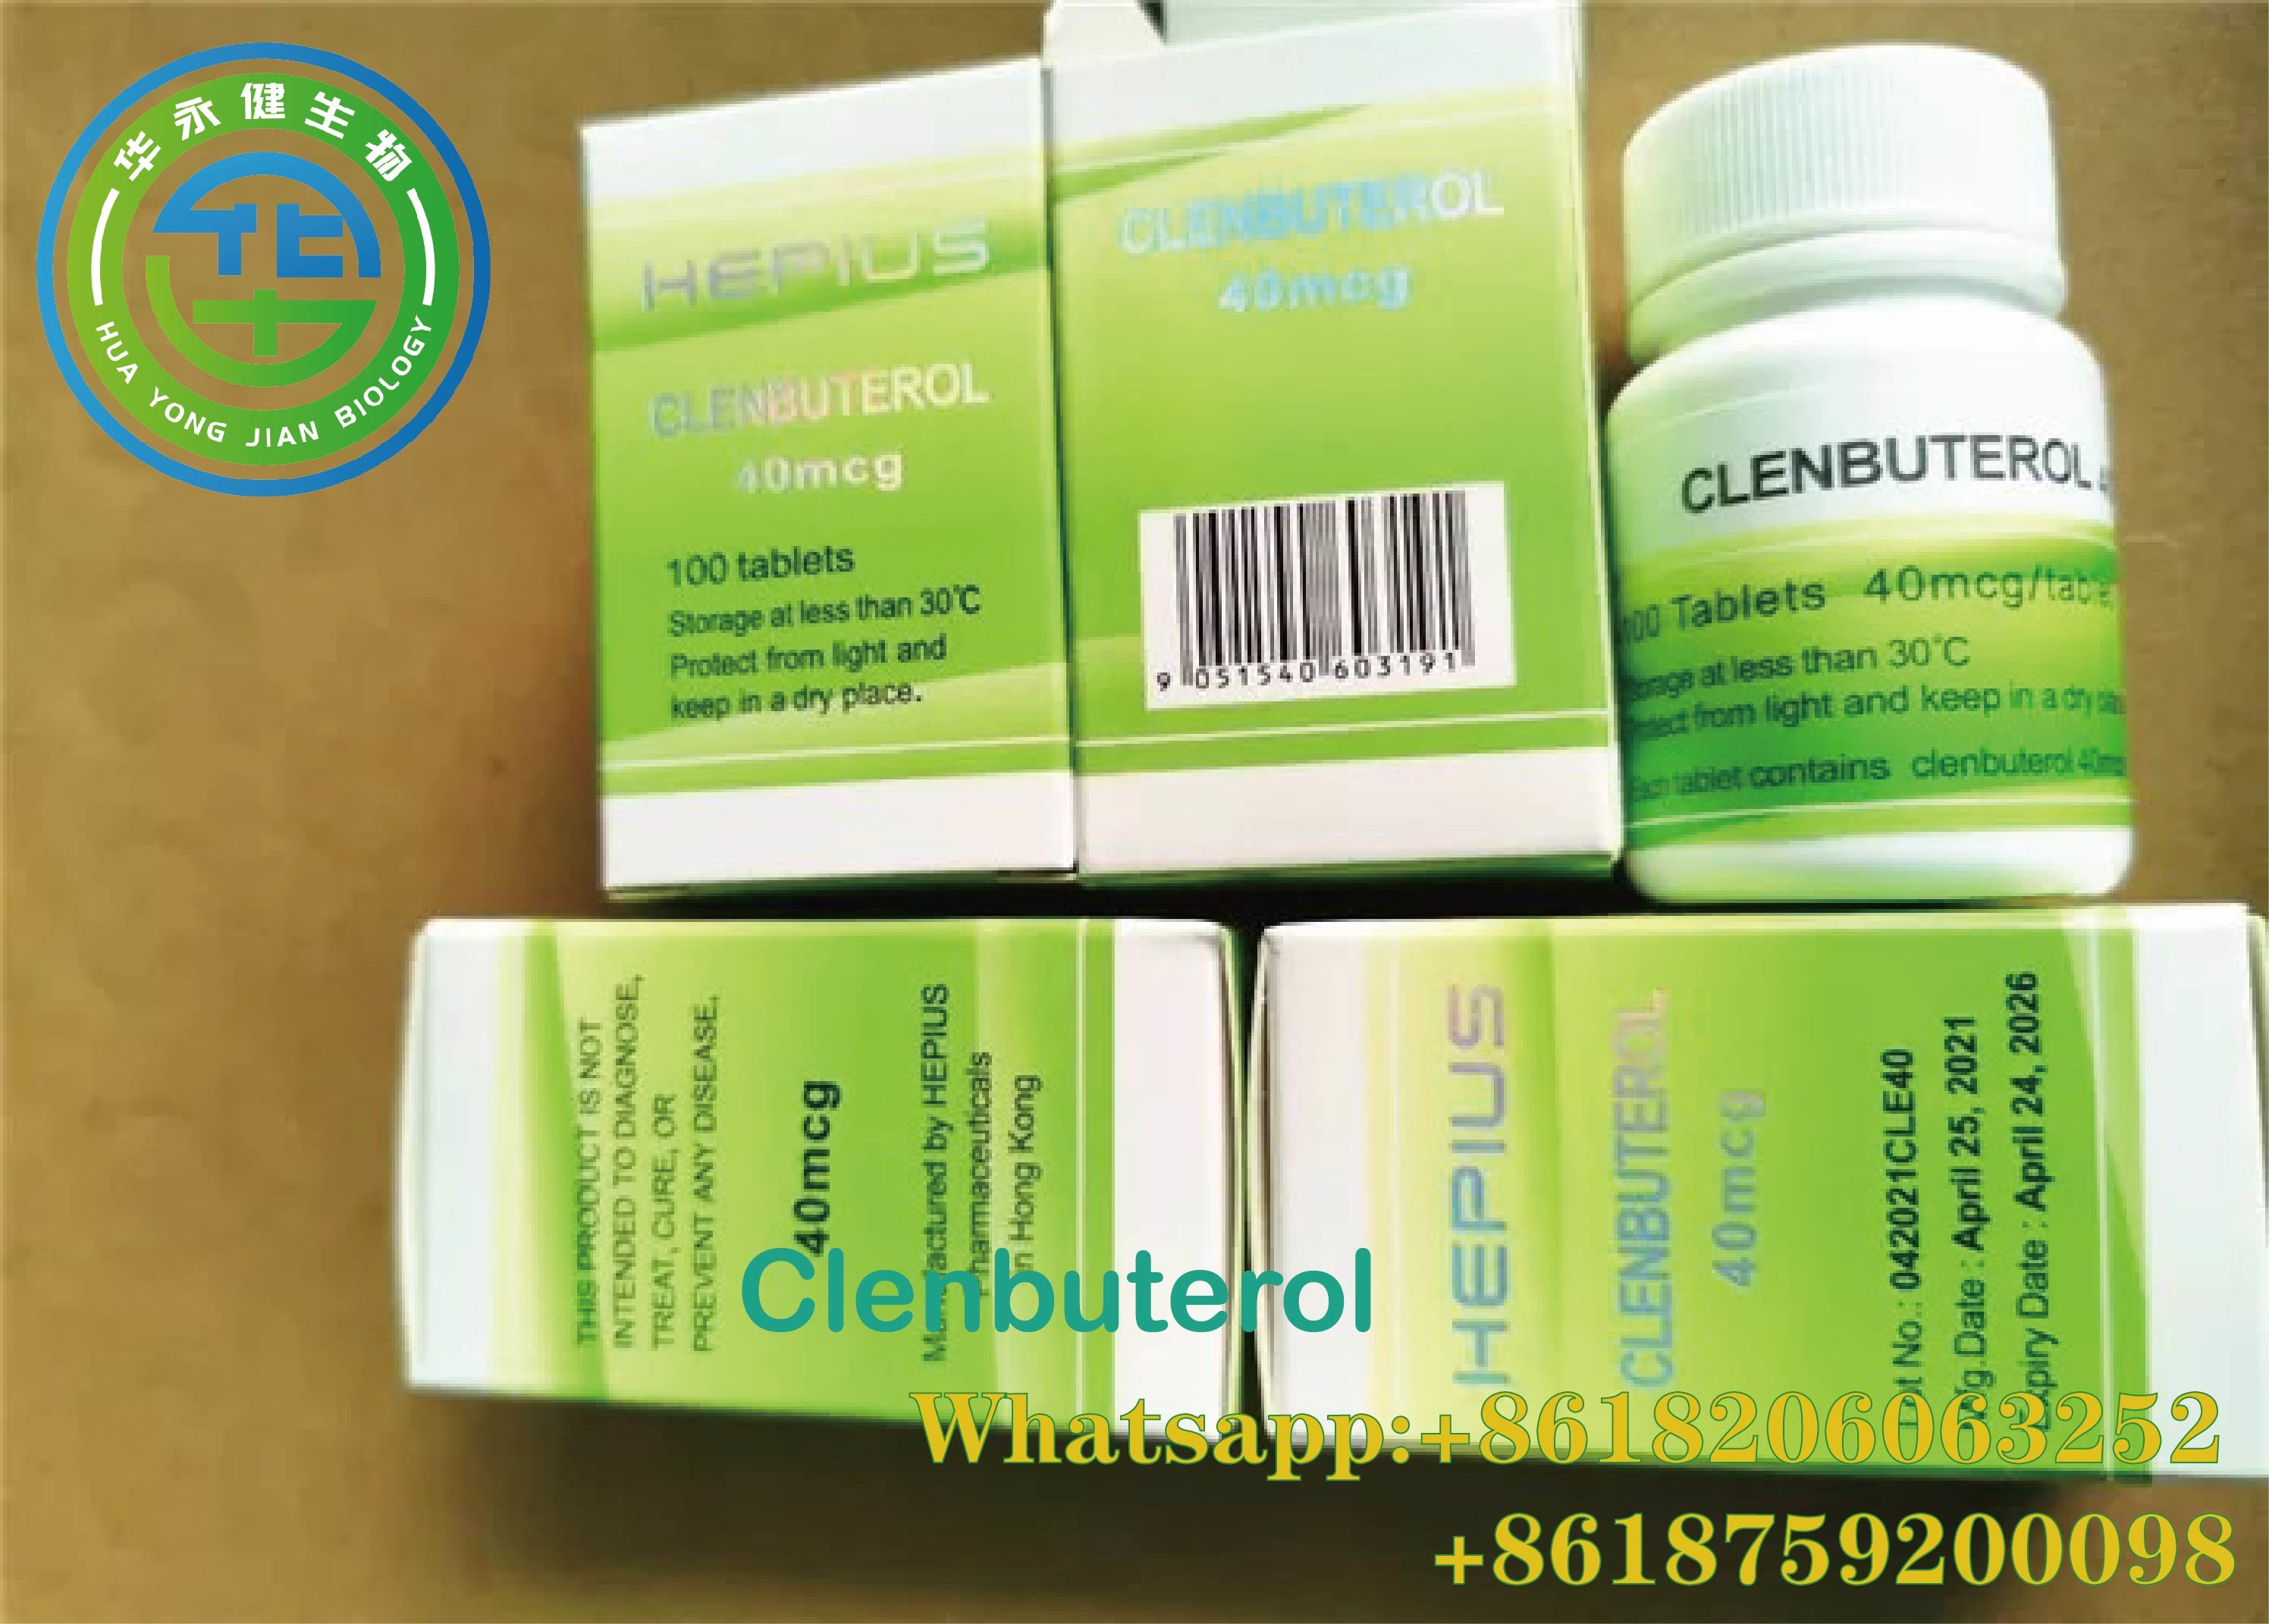 Wholesale anabolic Tablets Steroids cycle clenbuterol oral steroid 40mcgx100/bottle Cas 37148-27-9 from china suppliers